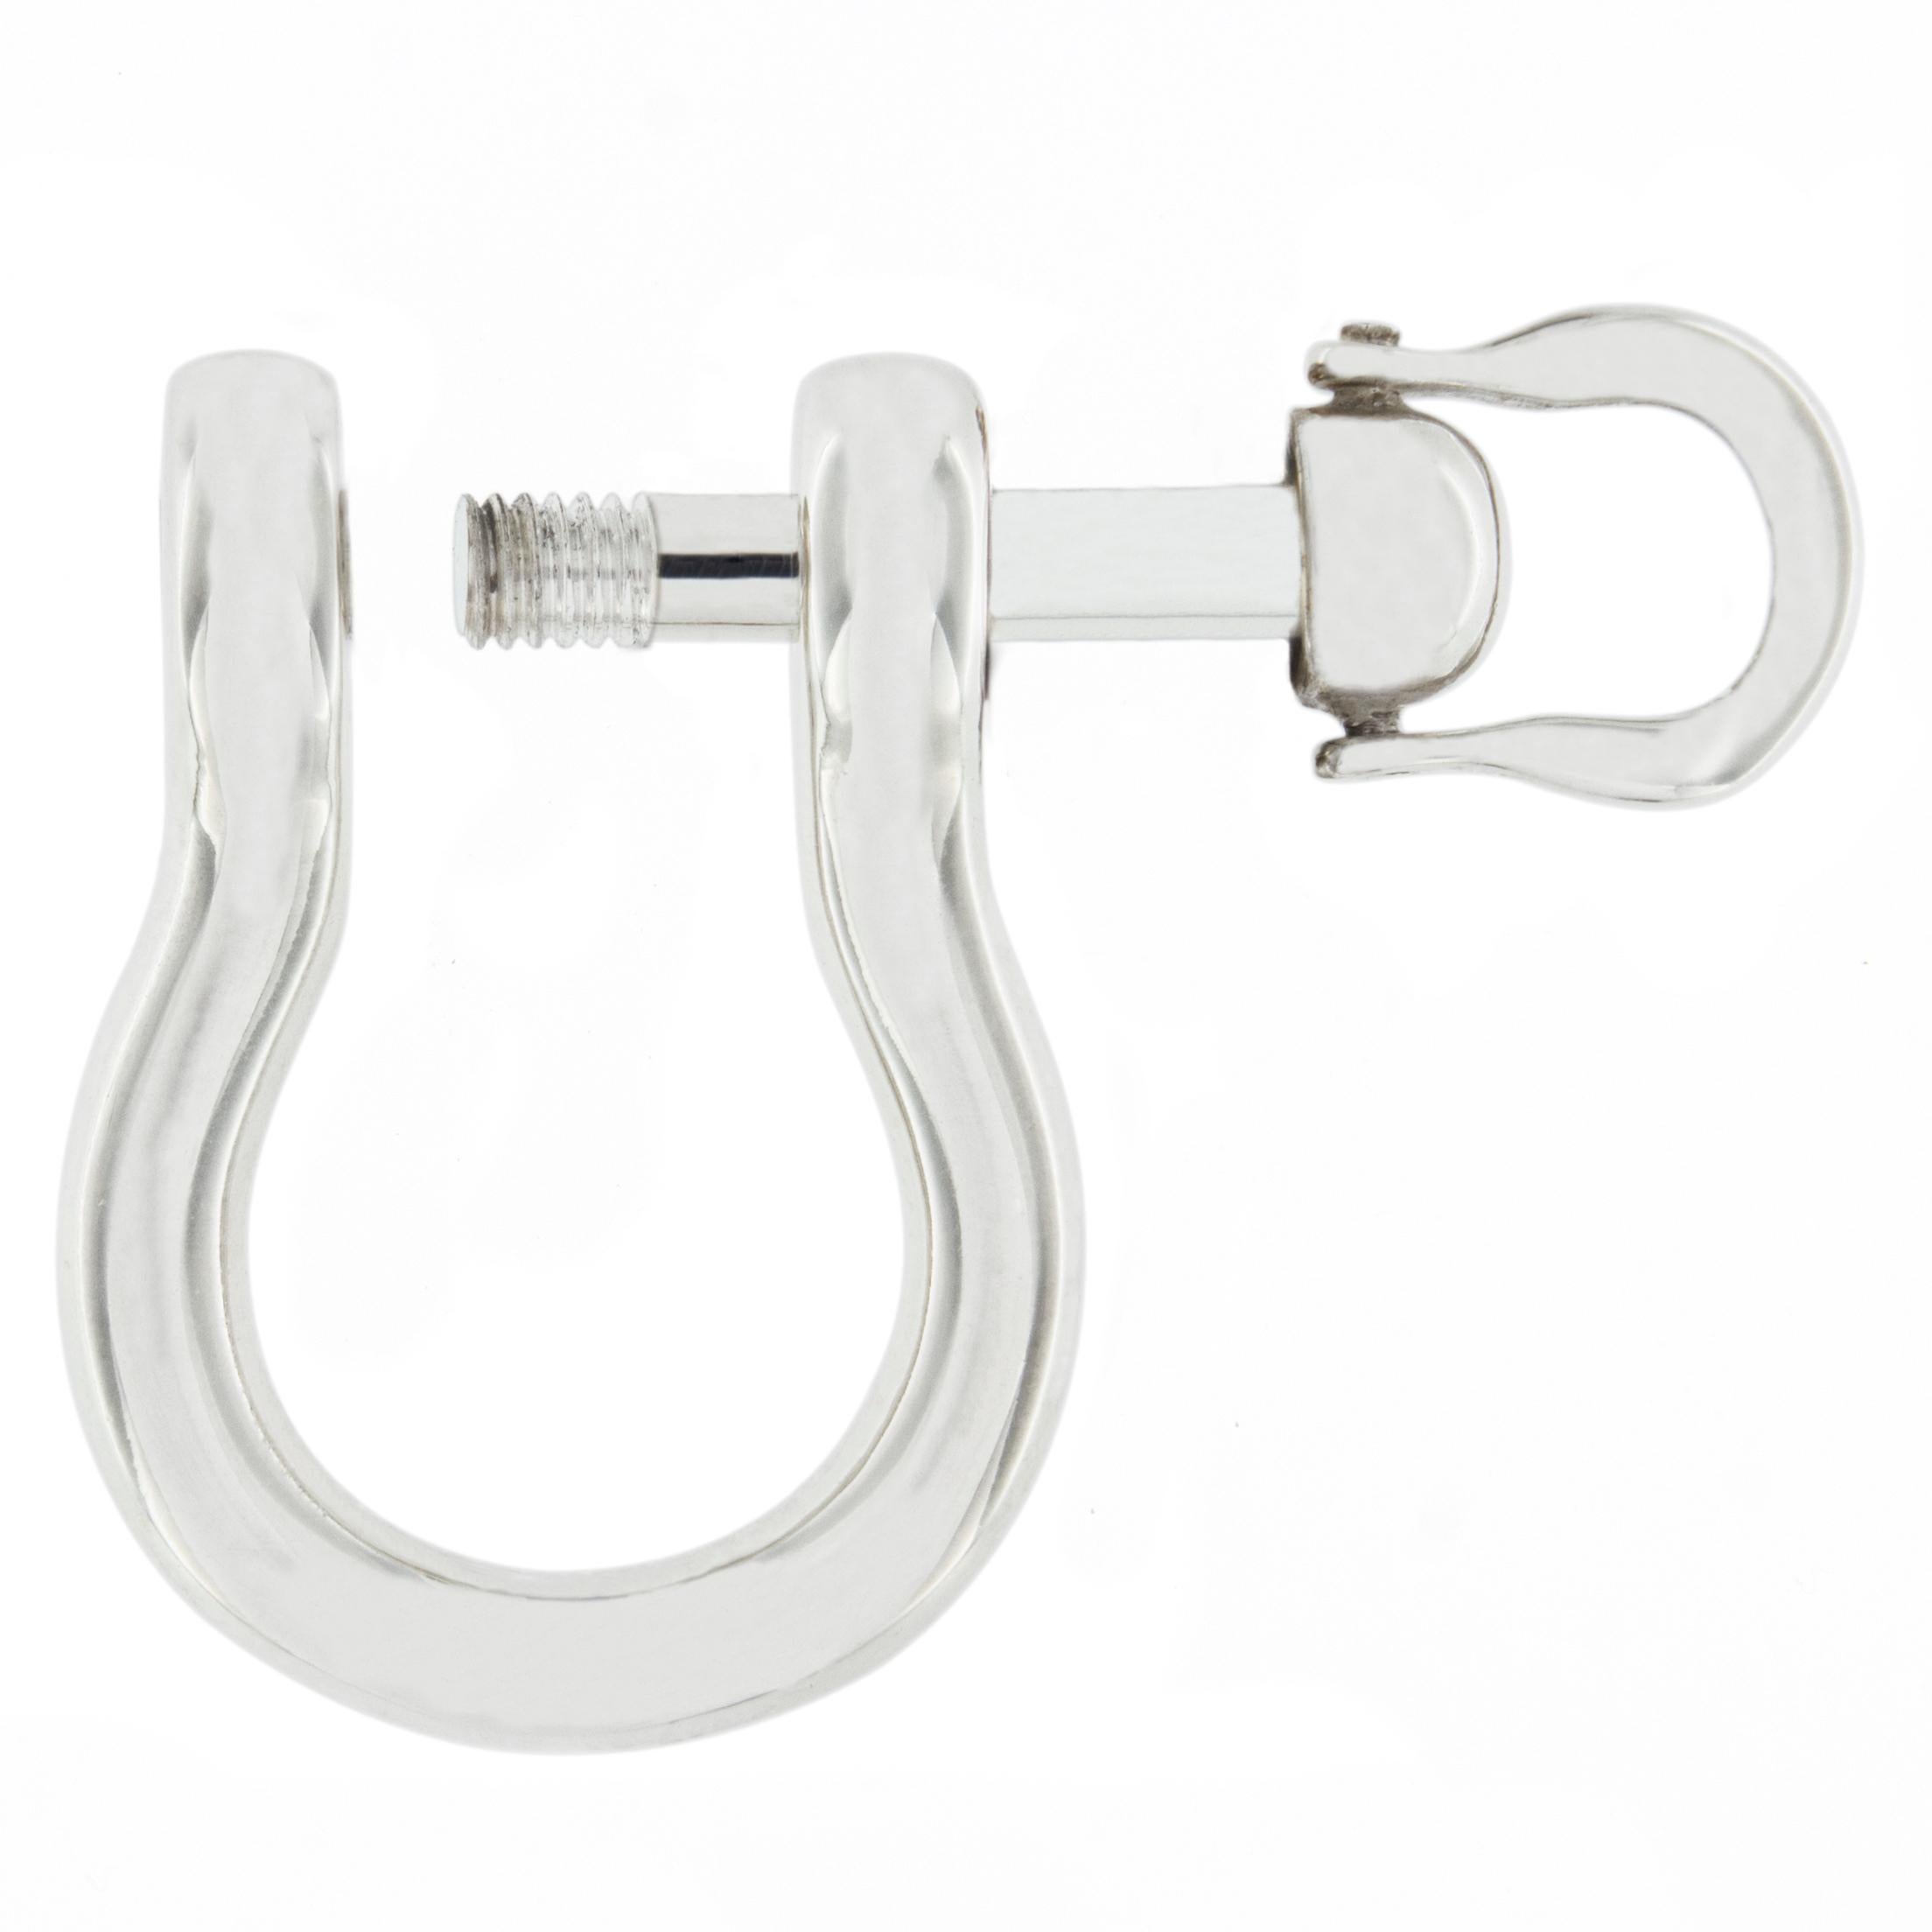 Alex Jona design collection, hand crafted in Italy, Shackle Sterling Silver key holder. 
Dimension: W 1.44 in / 36,57 mm X L 1.34 in/ 34 mm X D 0.42 in / 10,66 mm
Weight : 22 g
All Jona jewelry is new and has never been previously owned or worn.